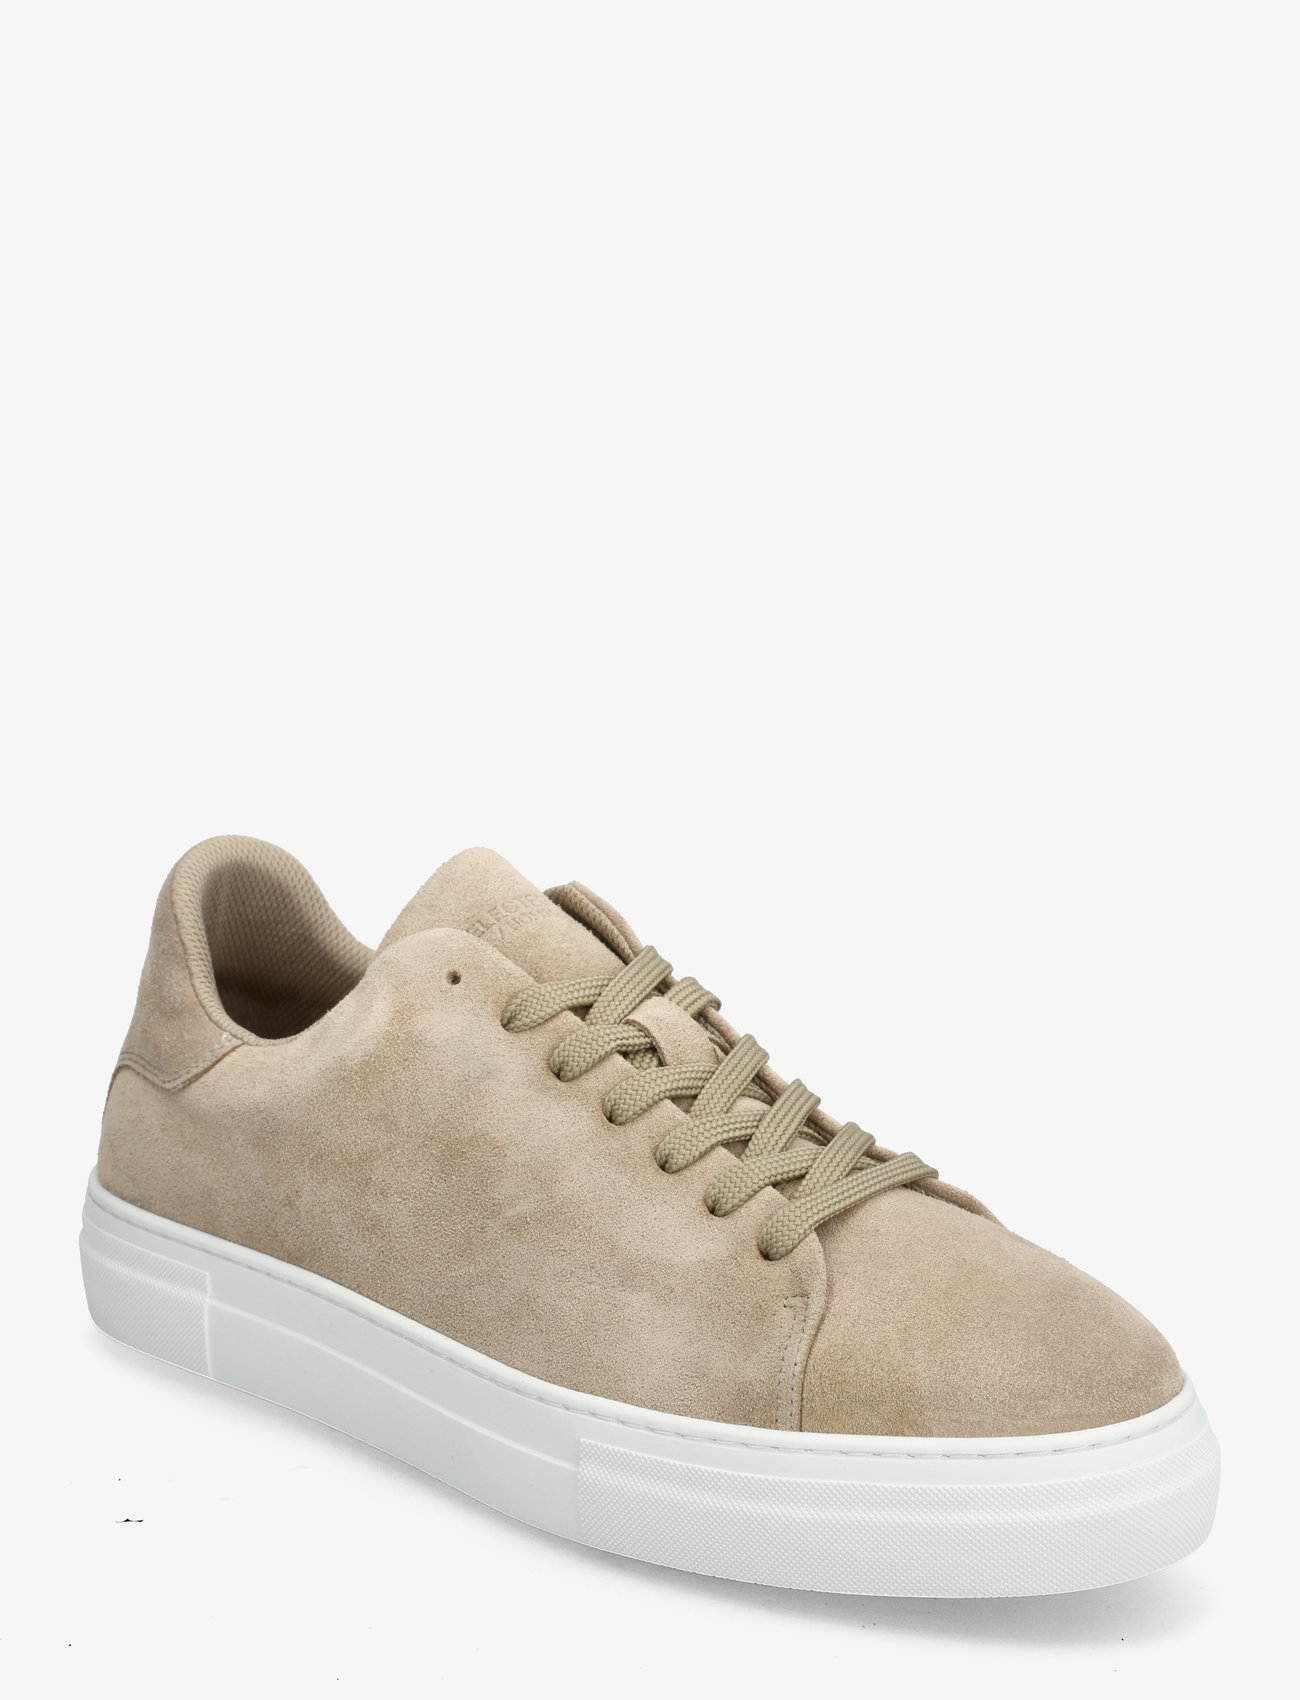 Selected Homme - SLHDAVID CHUNKY CLEAN SUEDE TRAINER B - låga sneakers - sand - 0